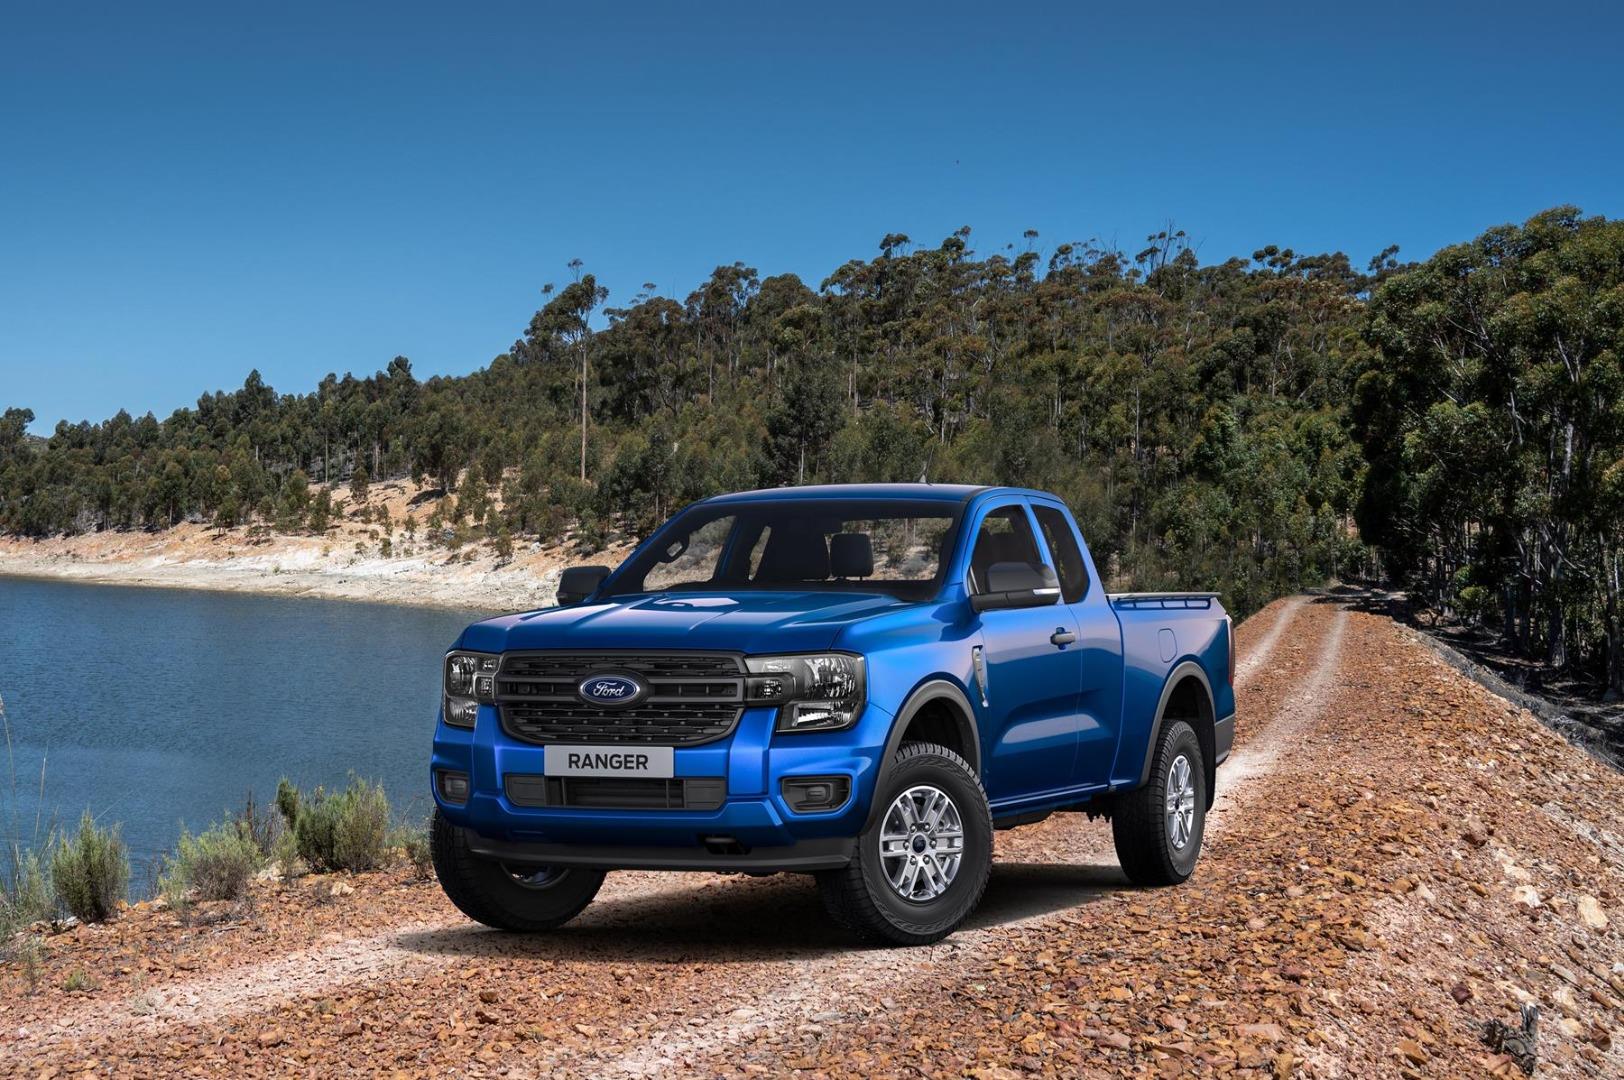 how much weight can the ford ranger carry?